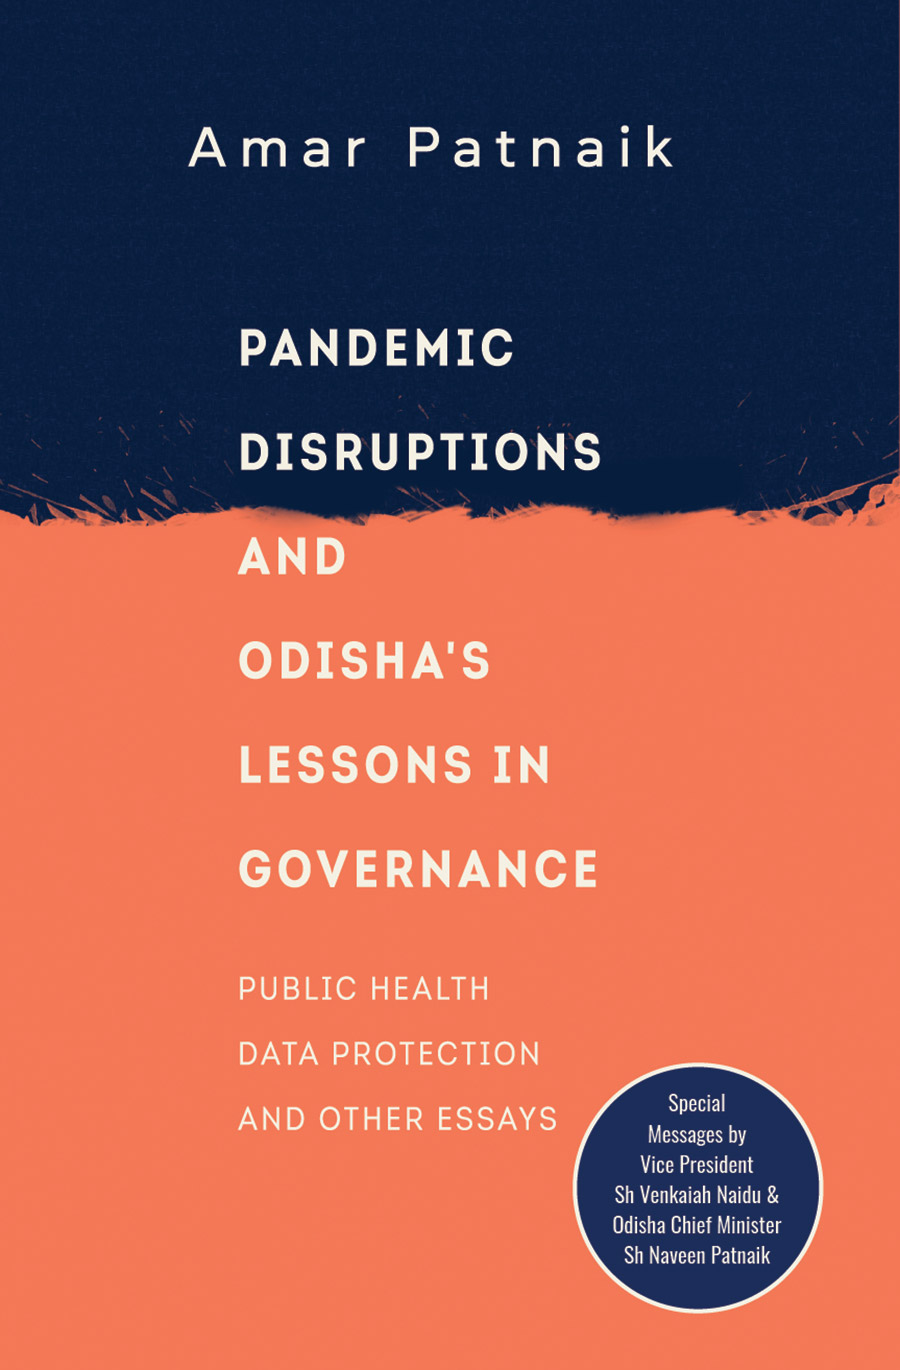 Pandemic Disruptions and Odisha’s Lessons in Governance